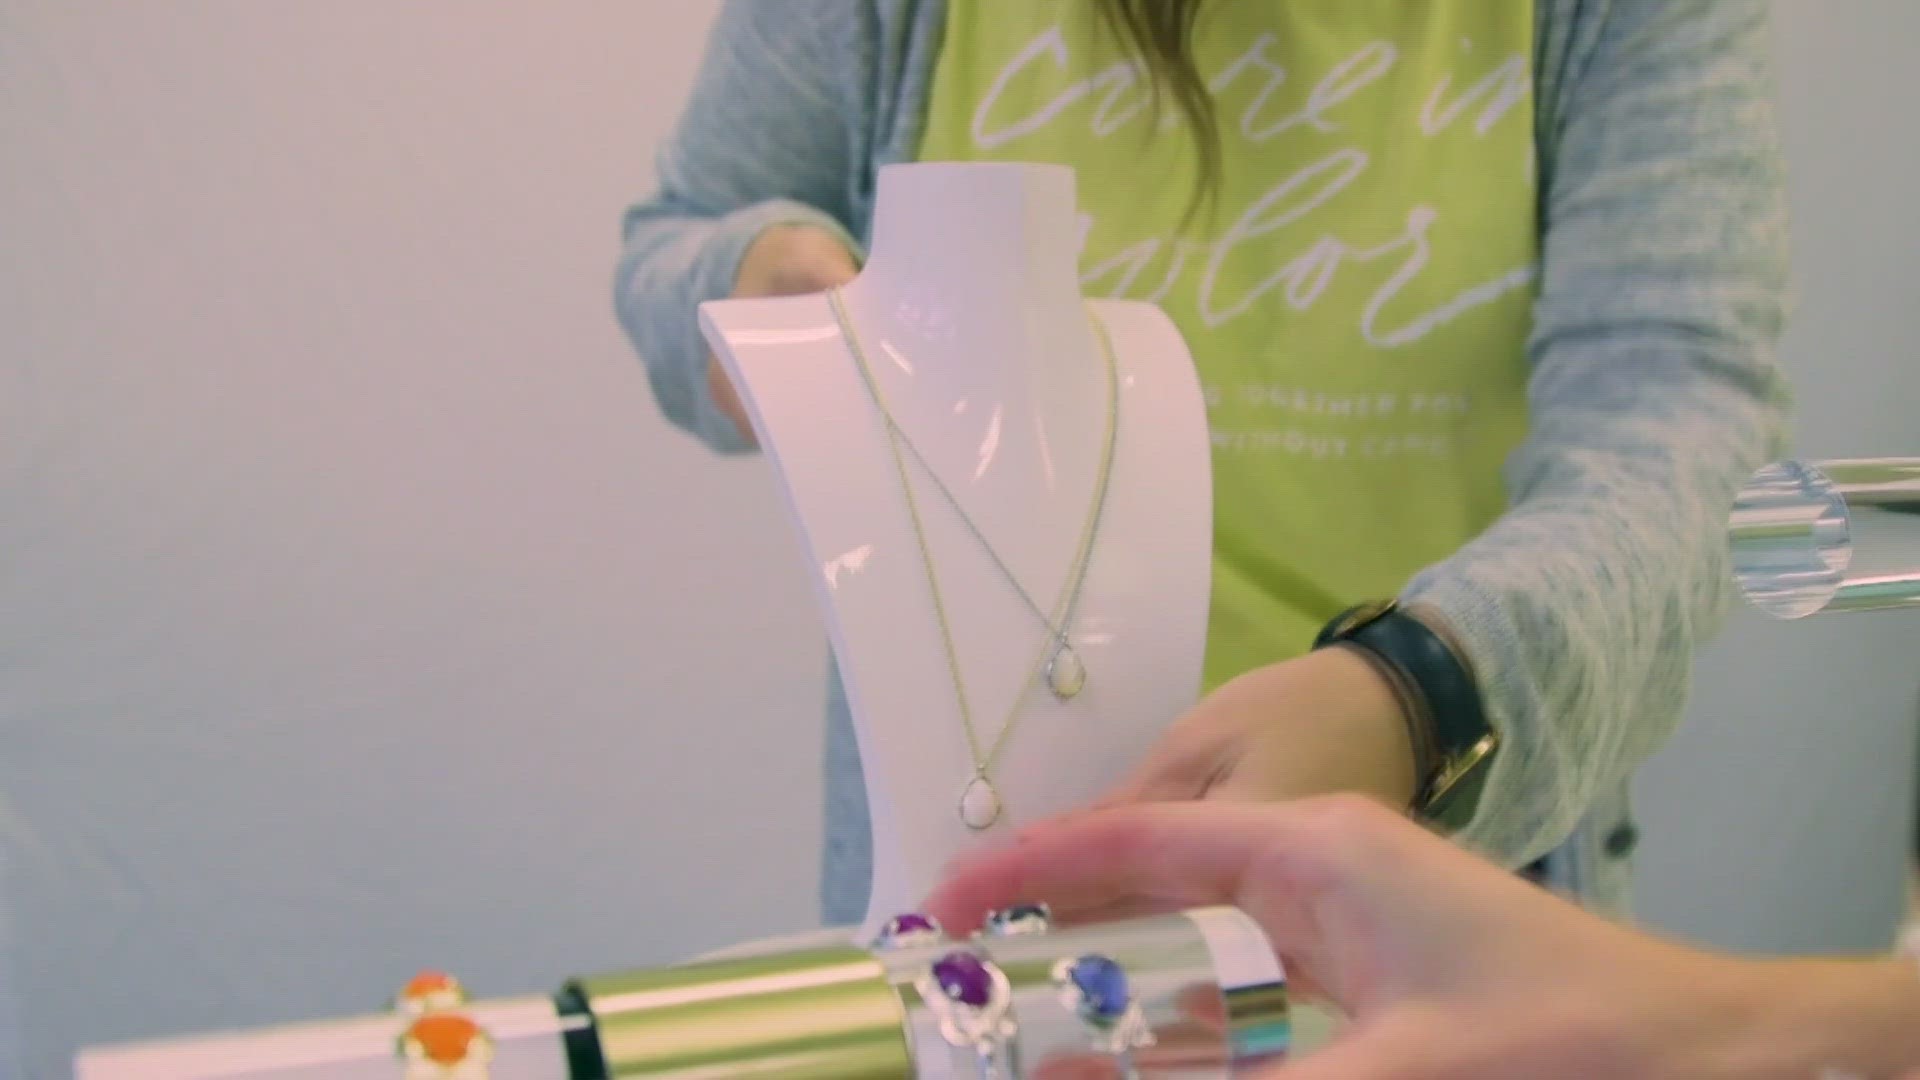 The Kendra Scott at Target collection will begin appearing in stores Oct. 22.